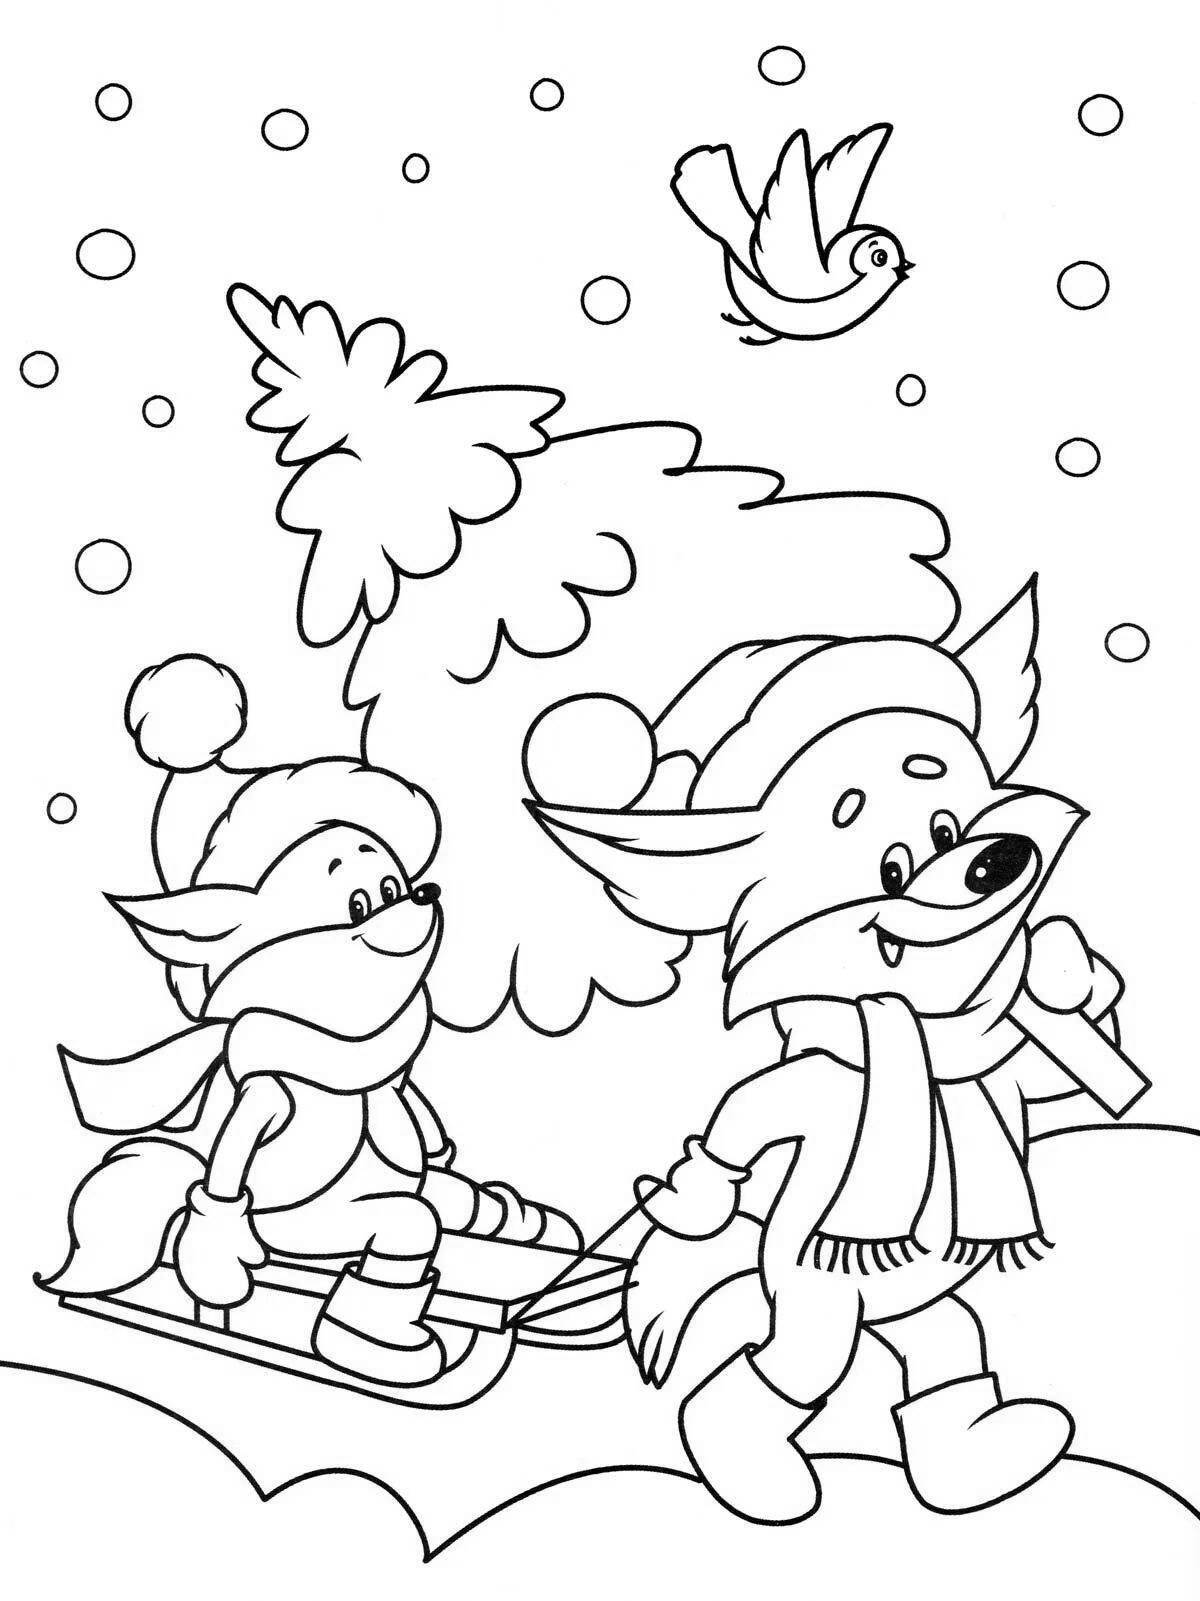 Colorful winter coloring book for 6 year olds